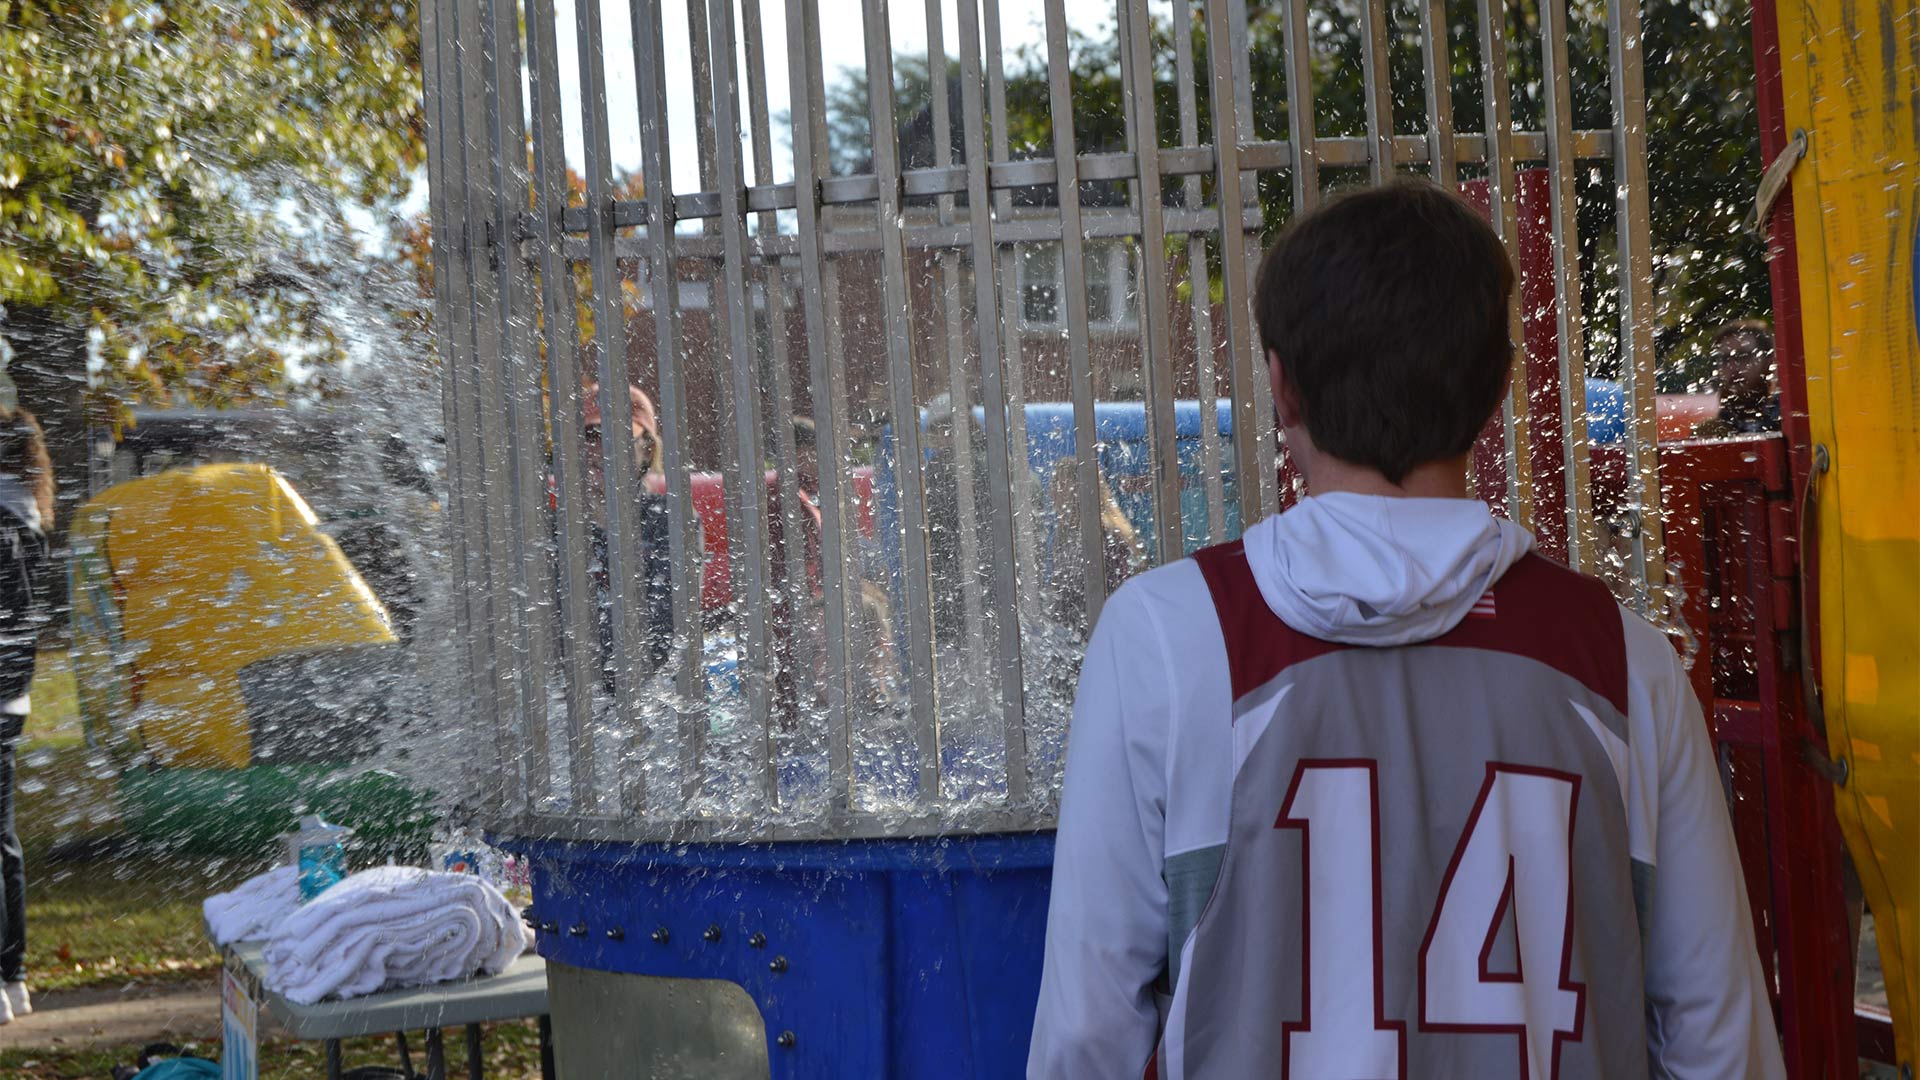 A participant takes a dip in the dunk tank during Sports Spectacular.